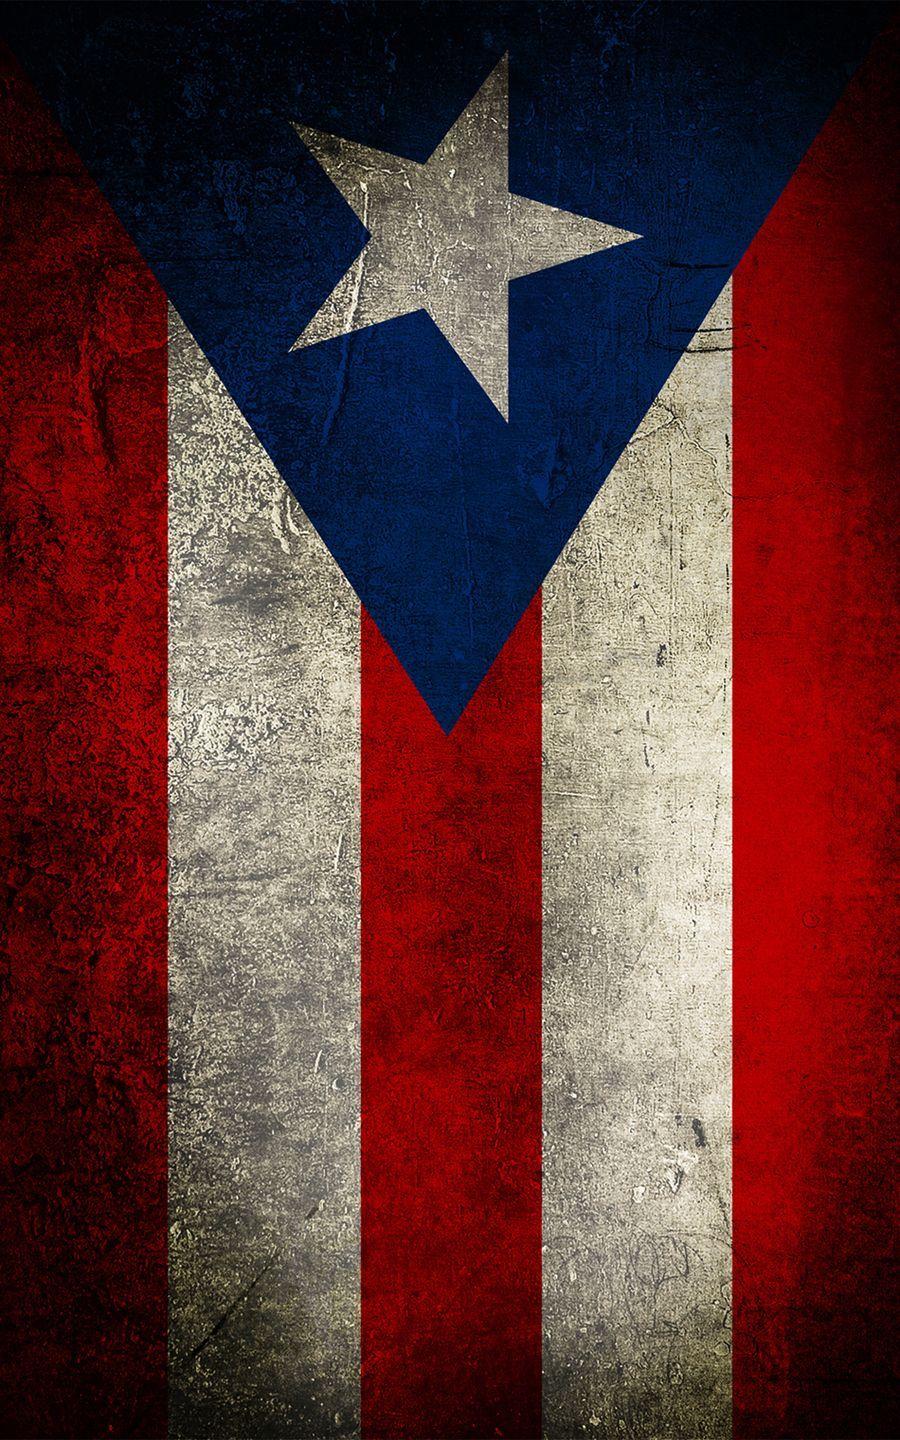 Free download 1920x1200 Puerto Rico Flag Wallpaper free Wallpapers Download  800x500 for your Desktop Mobile  Tablet  Explore 73 Puerto Rico  Wallpapers Free  Puerto Rico Flag Wallpaper Free Wallpaper Puerto